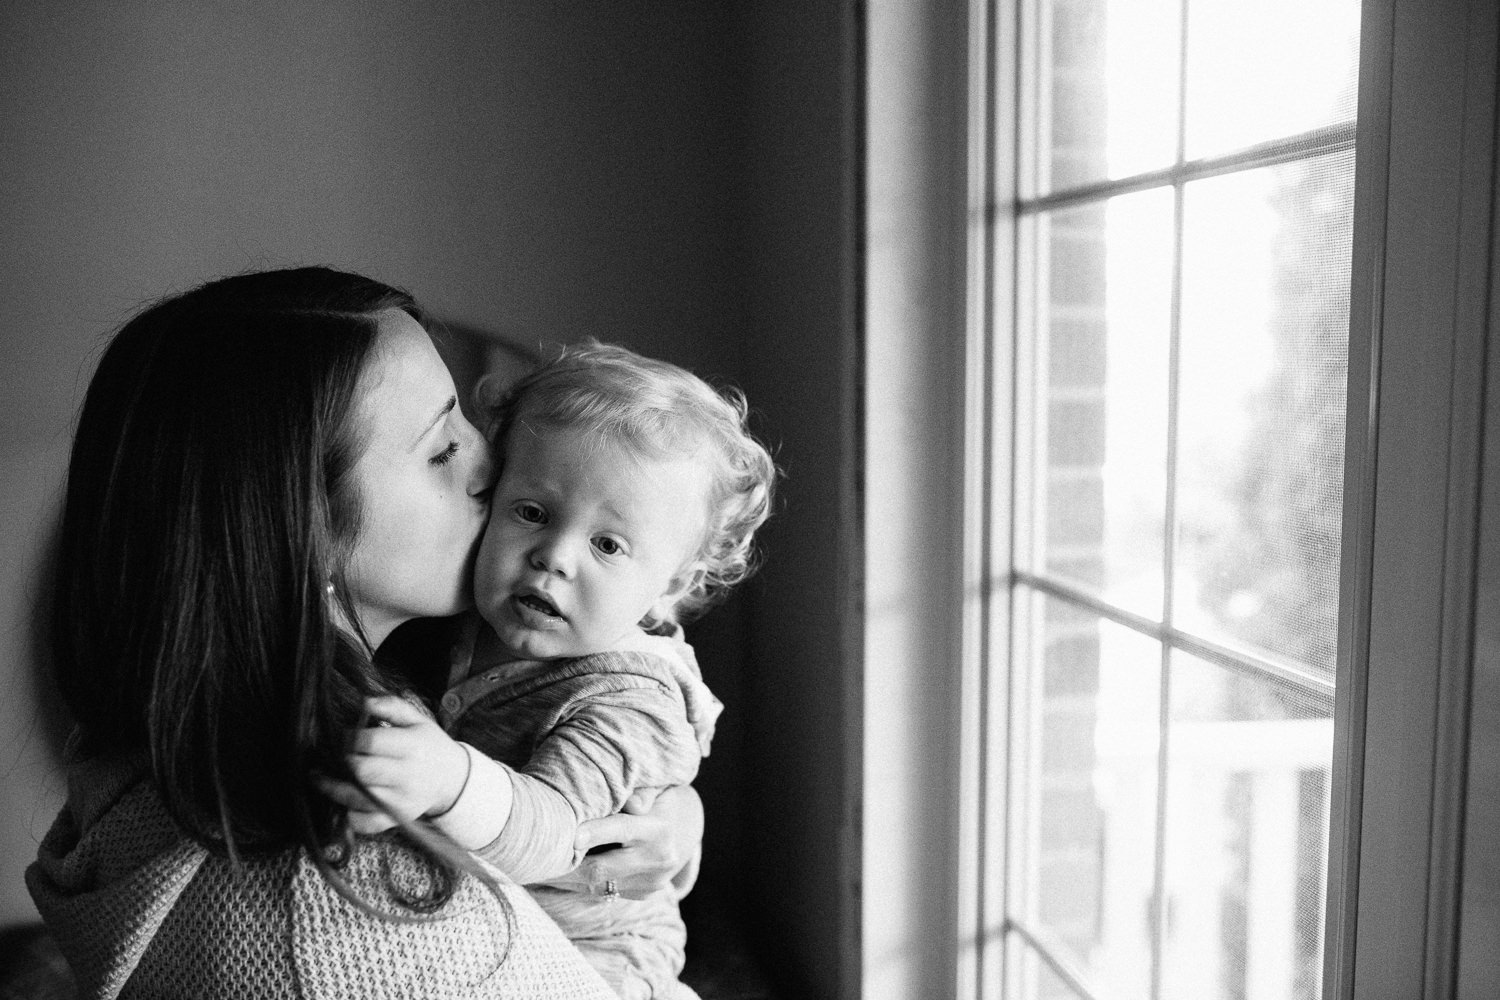 mom kissing 18 month old son on cheek, standing by window - Newmarket Family Photography